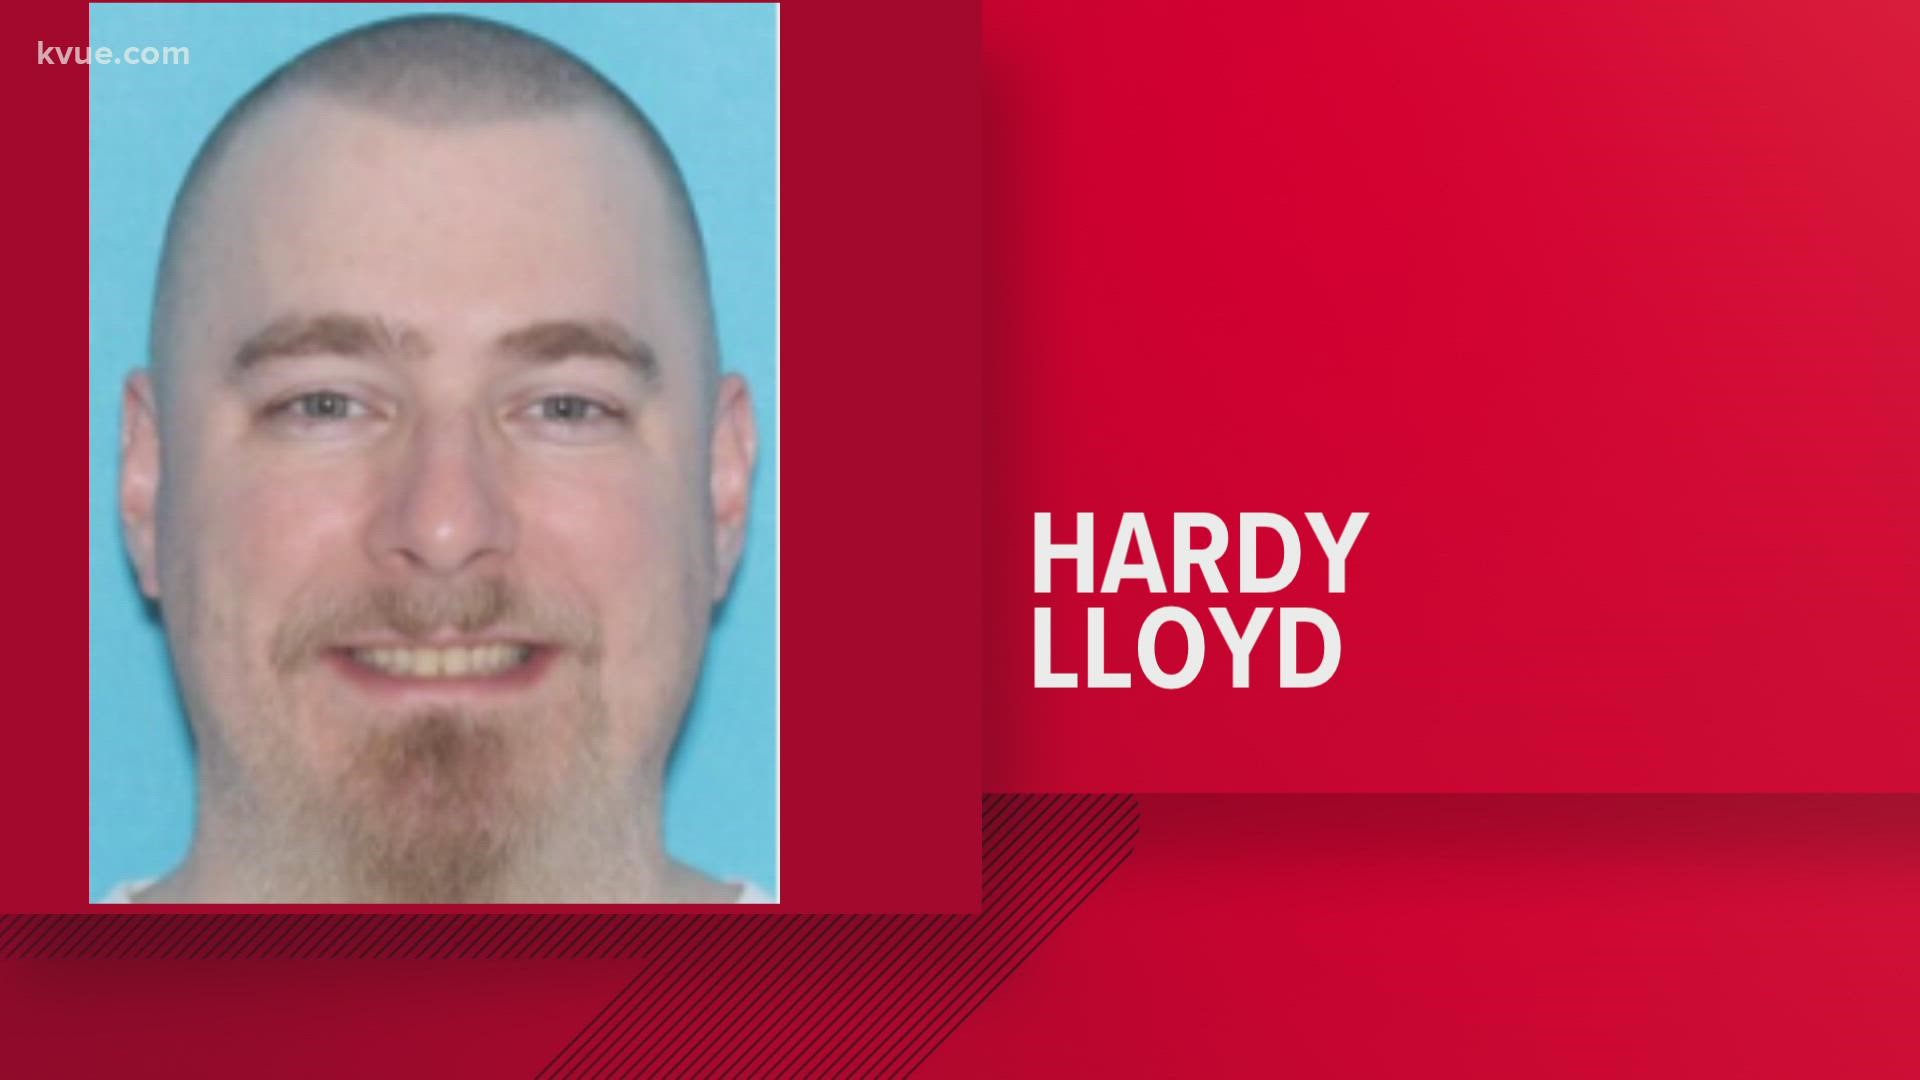 Officials say Hardy Lloyd threatened to carry a firearm onto the grounds of the Texas Capitol and challenge any officer that tries to "take enforcement action."